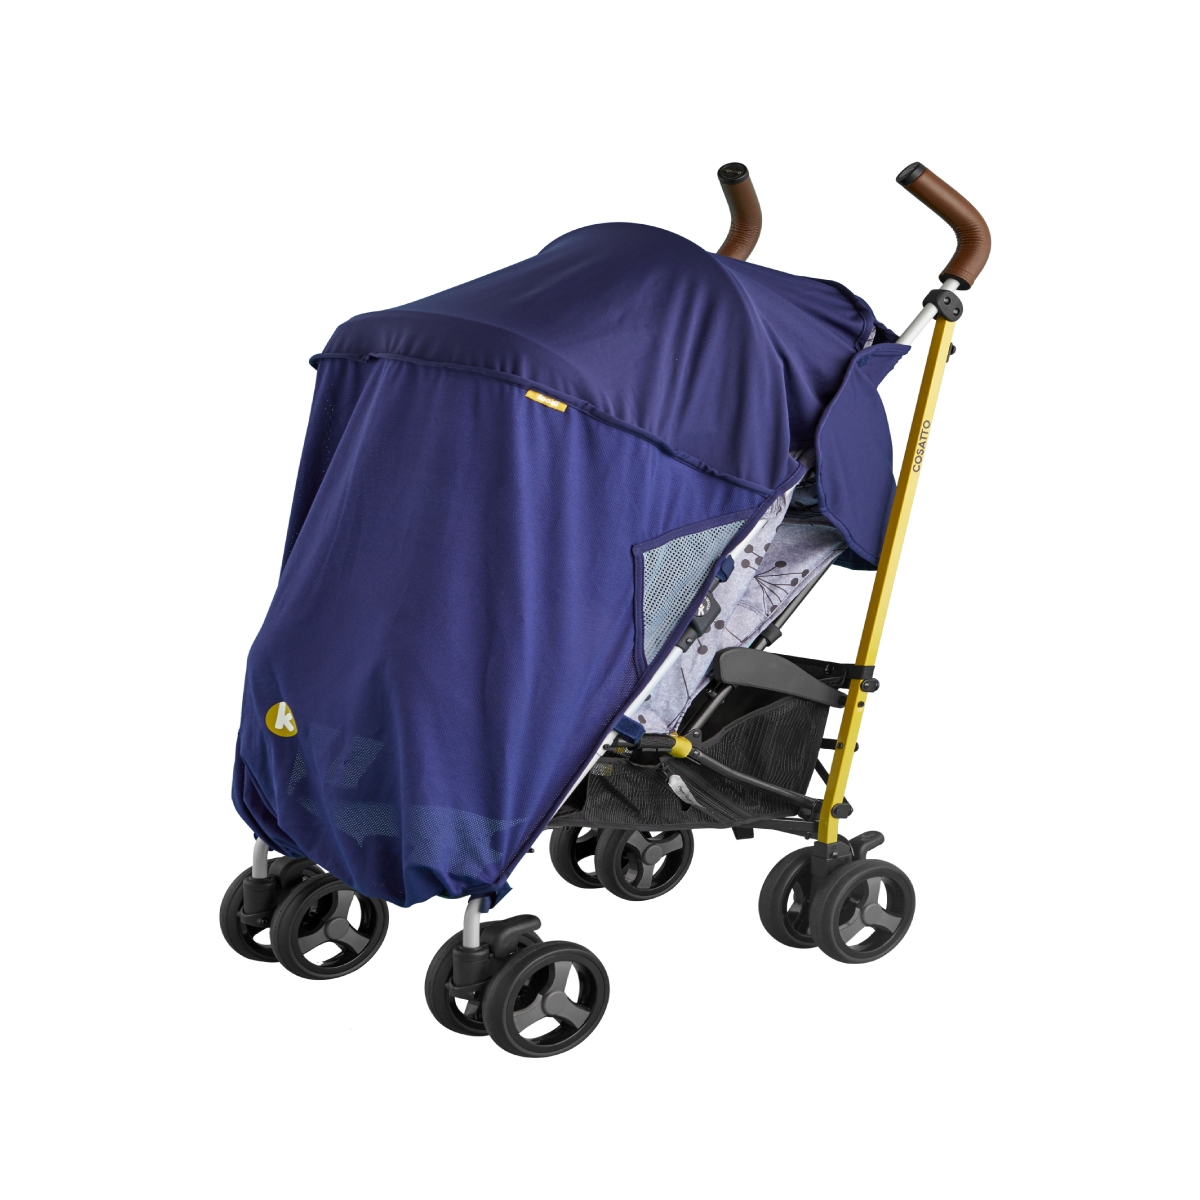 The Real Sunshady Universal Single Stroller Cover